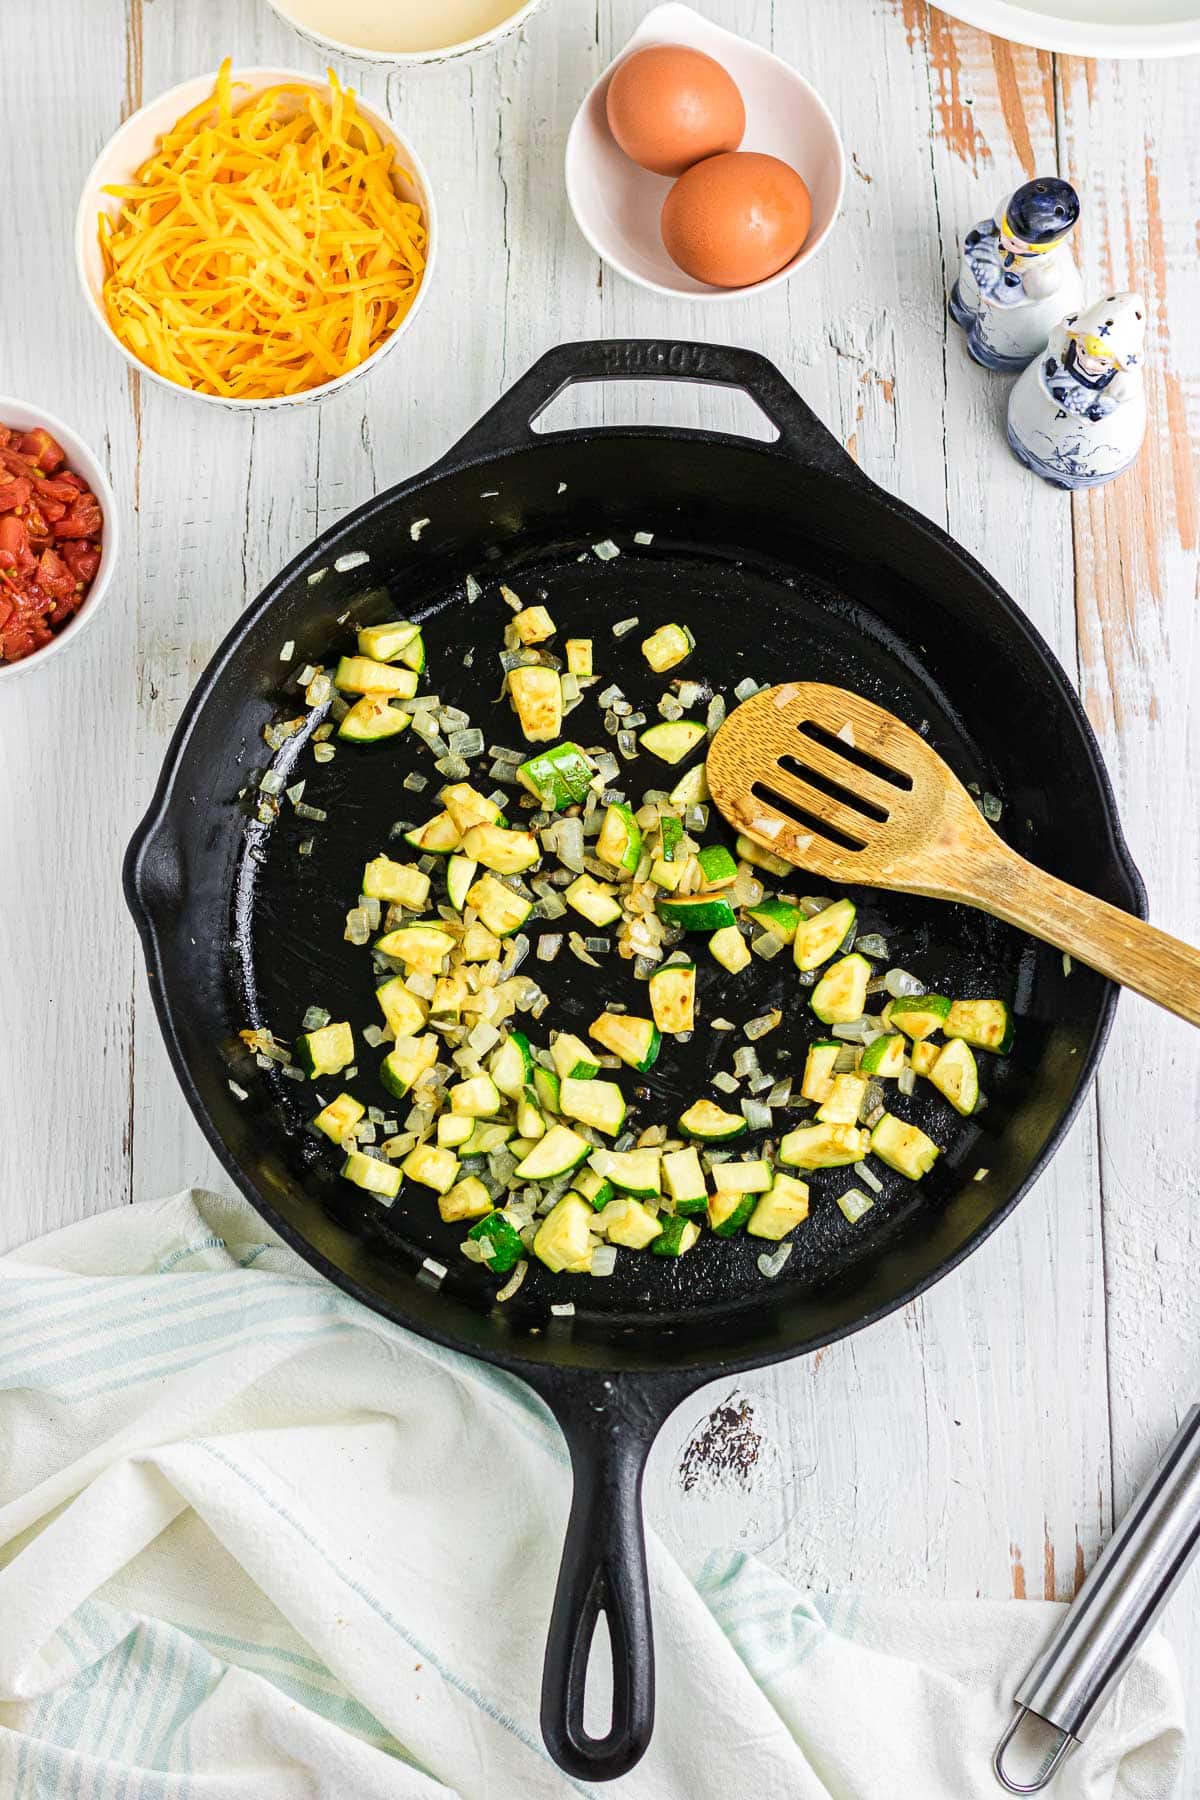 zucchini being cooked in a skillet.